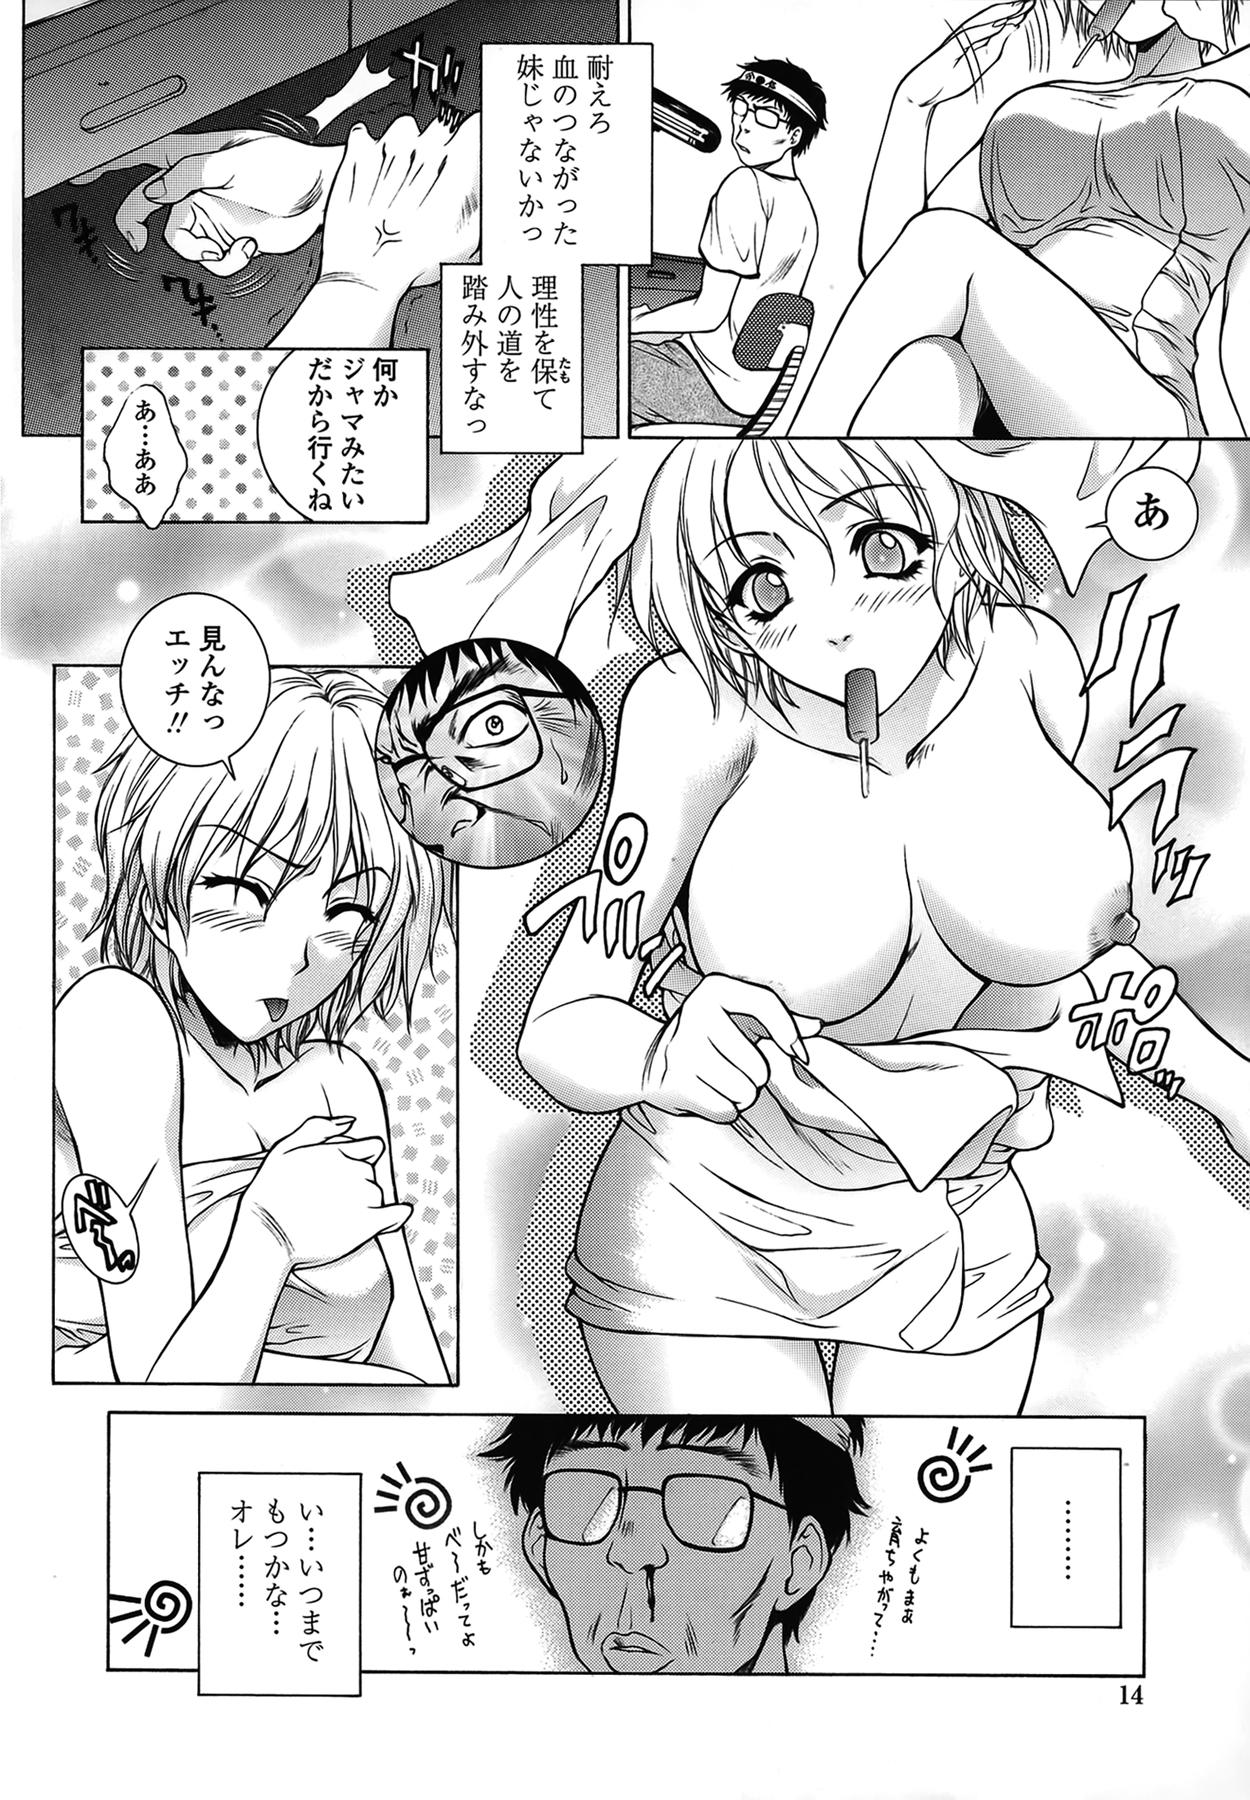 Cocksucking Imouto wa Sakurairo - My sister is cherry blossom color. Pussy Fuck - Page 13